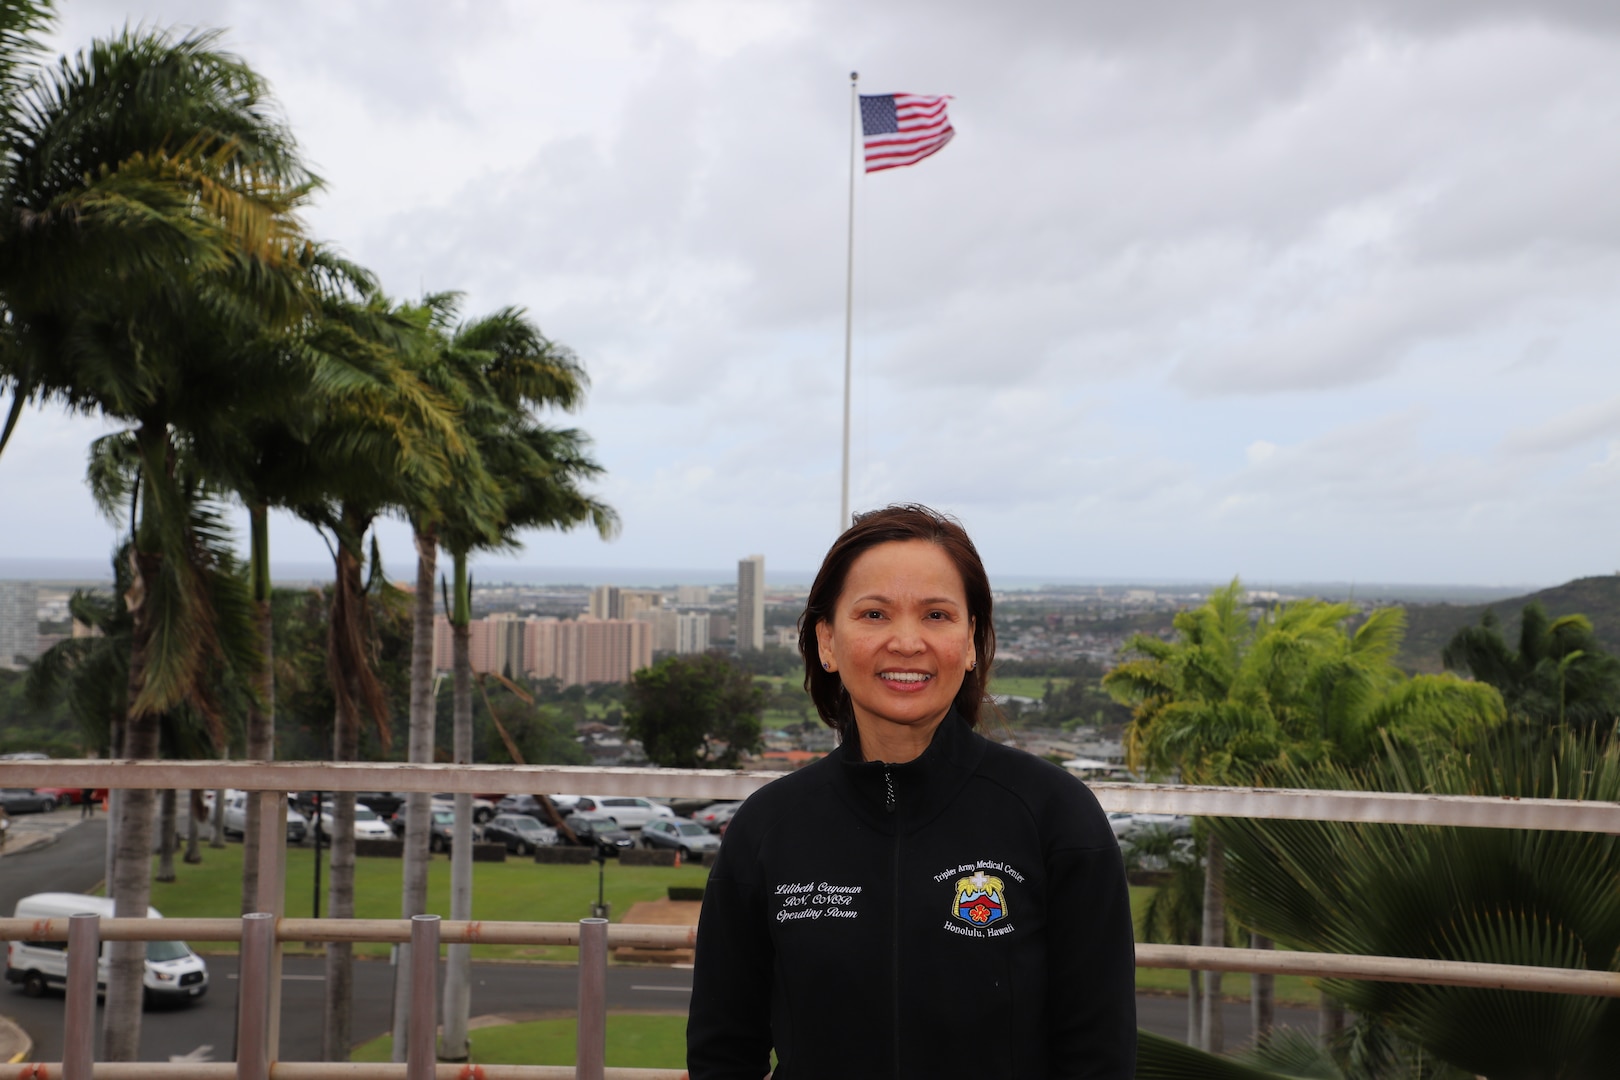 Today we recognize Lilibeth “Beth” Cayanan. She has been at Tripler since May of 1998 — 25 years!